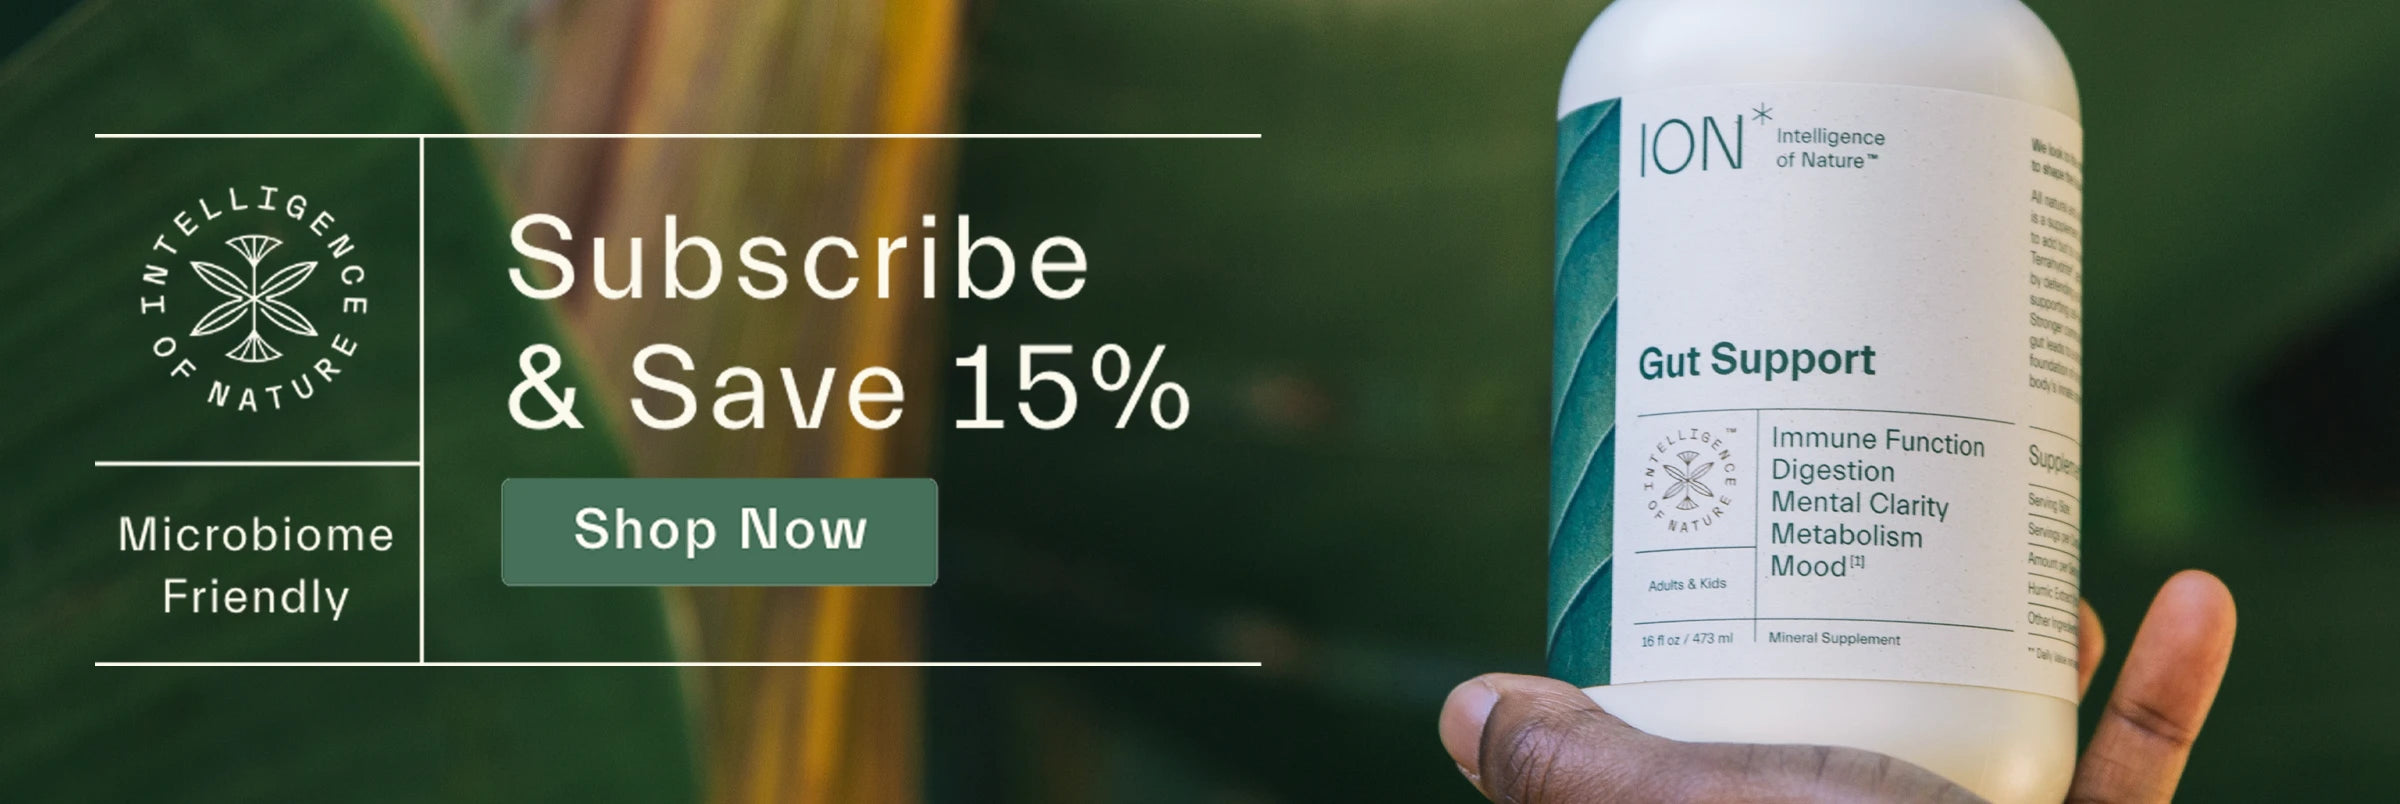 ION* Subscribe and Save 15%